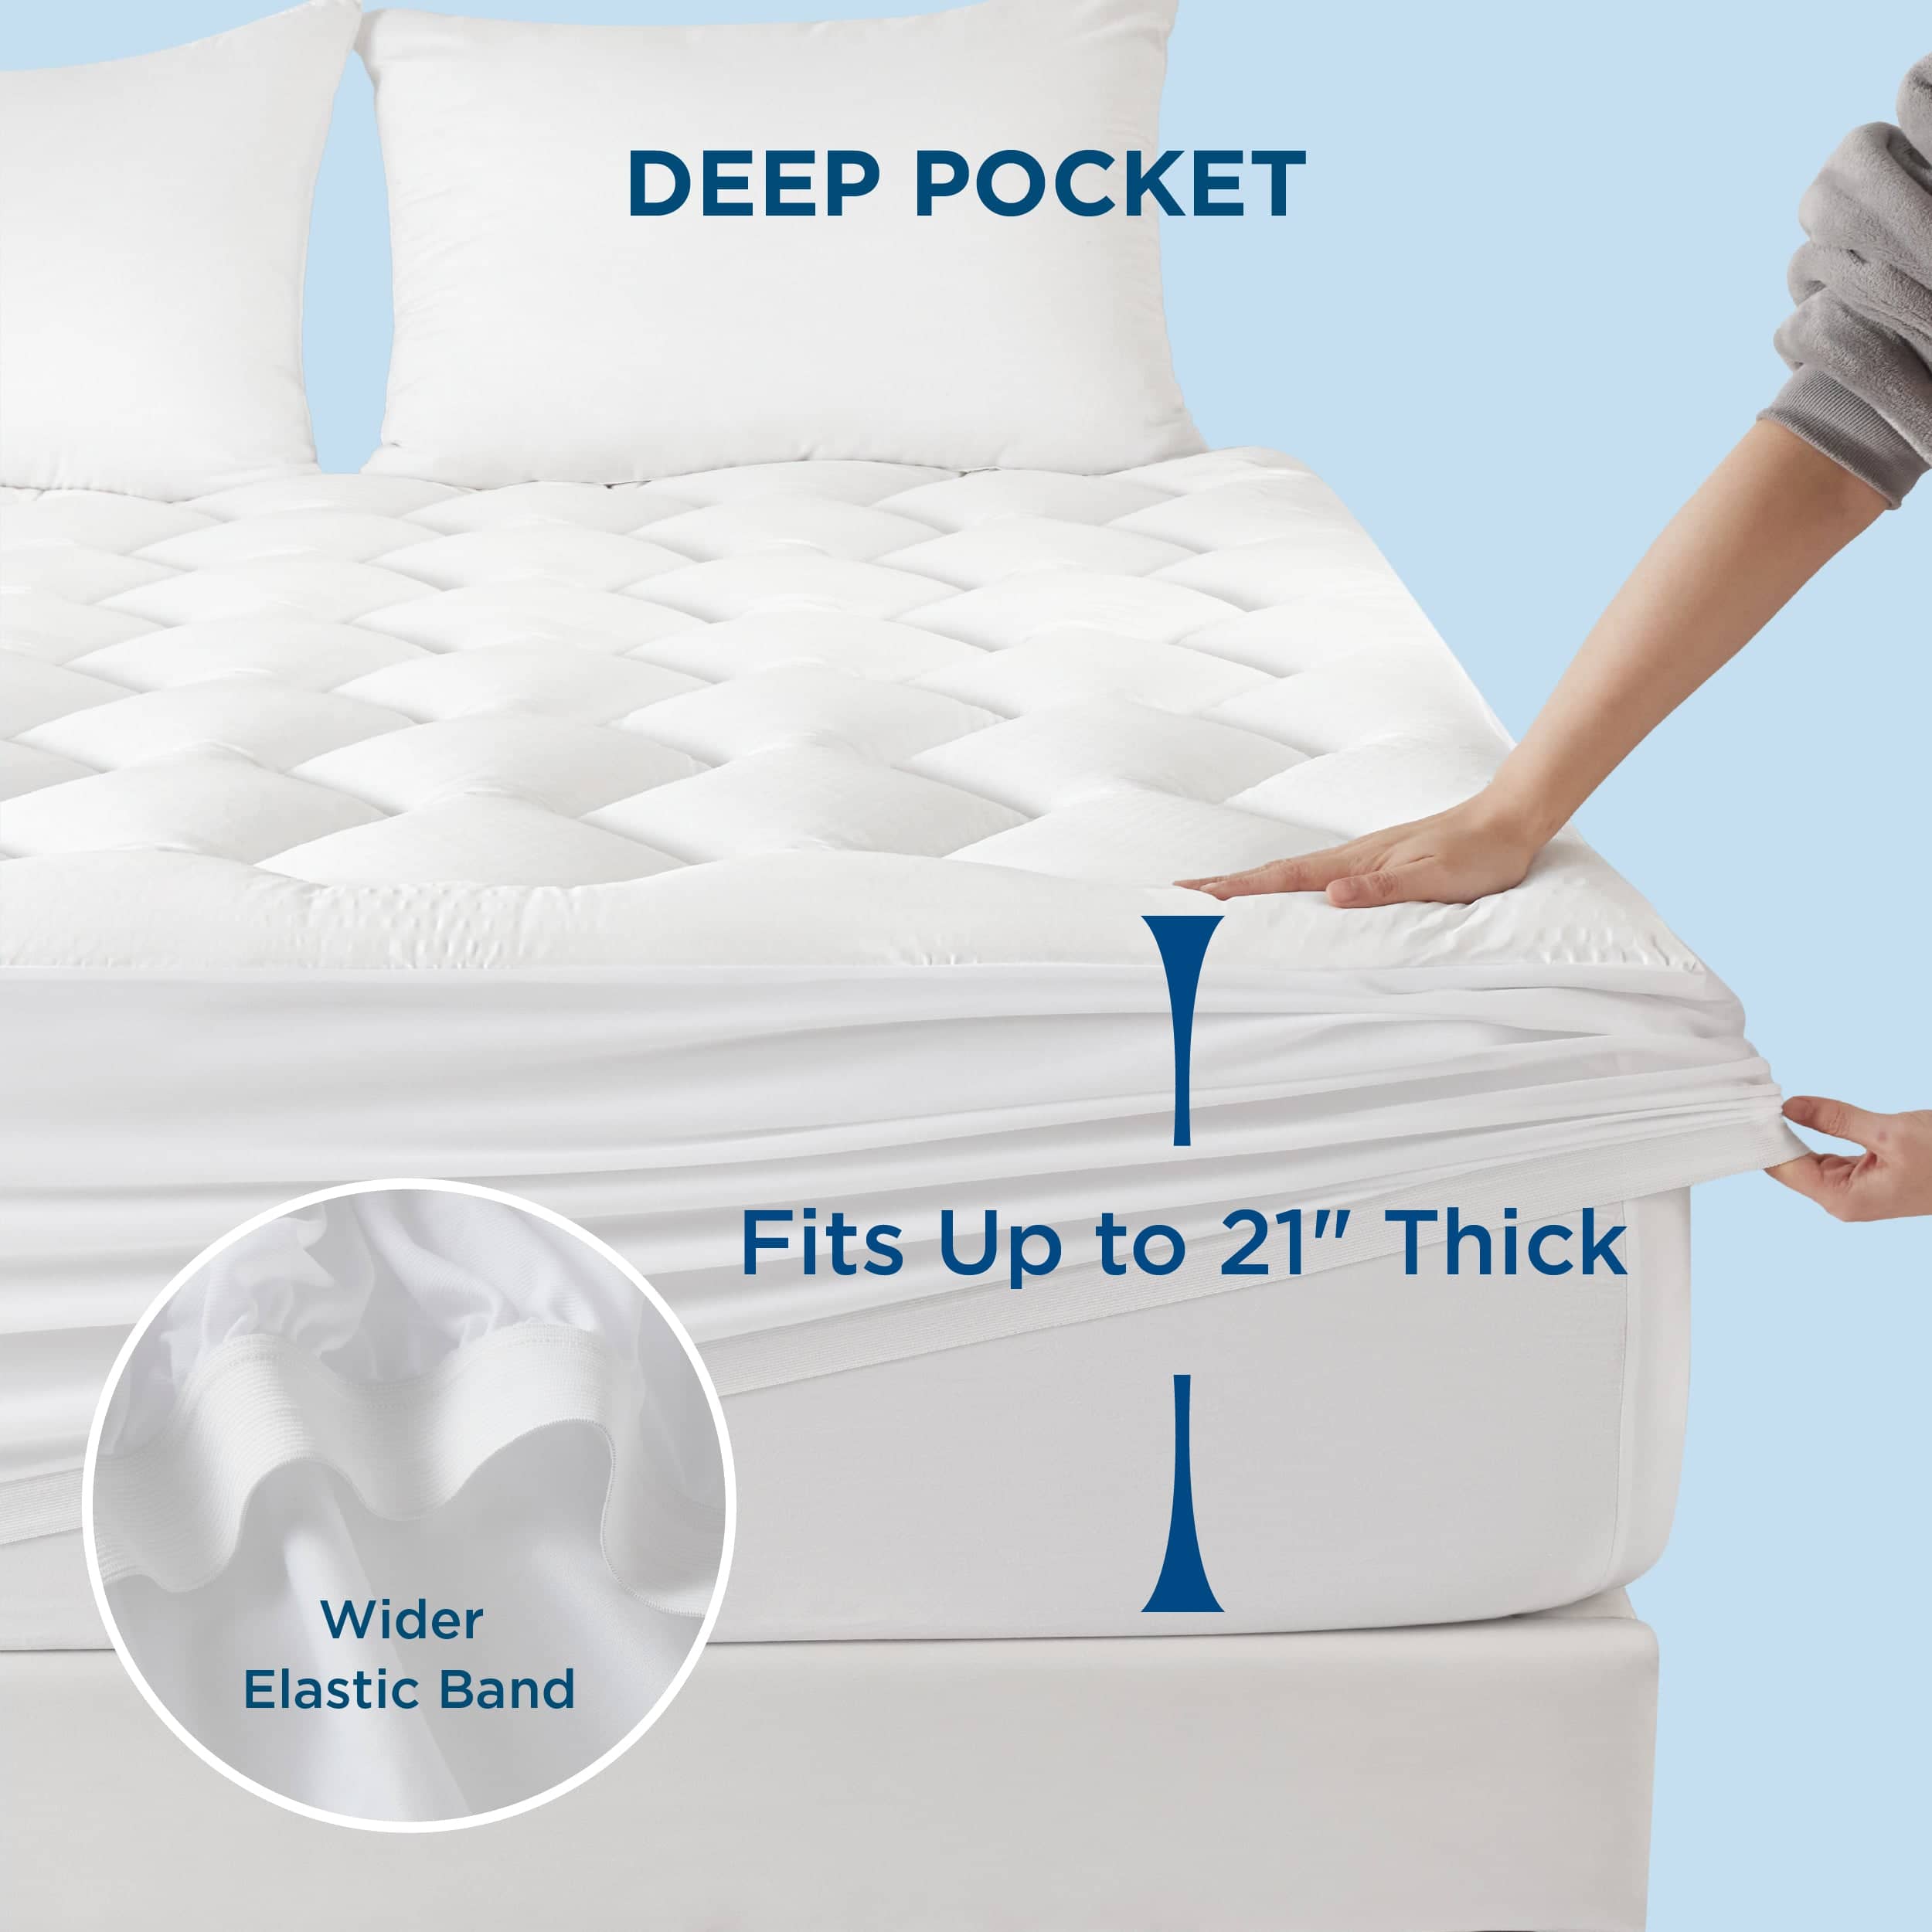 Bedsure Breescape Extra Cooling Mattress Pad with Thick Quilted Cover